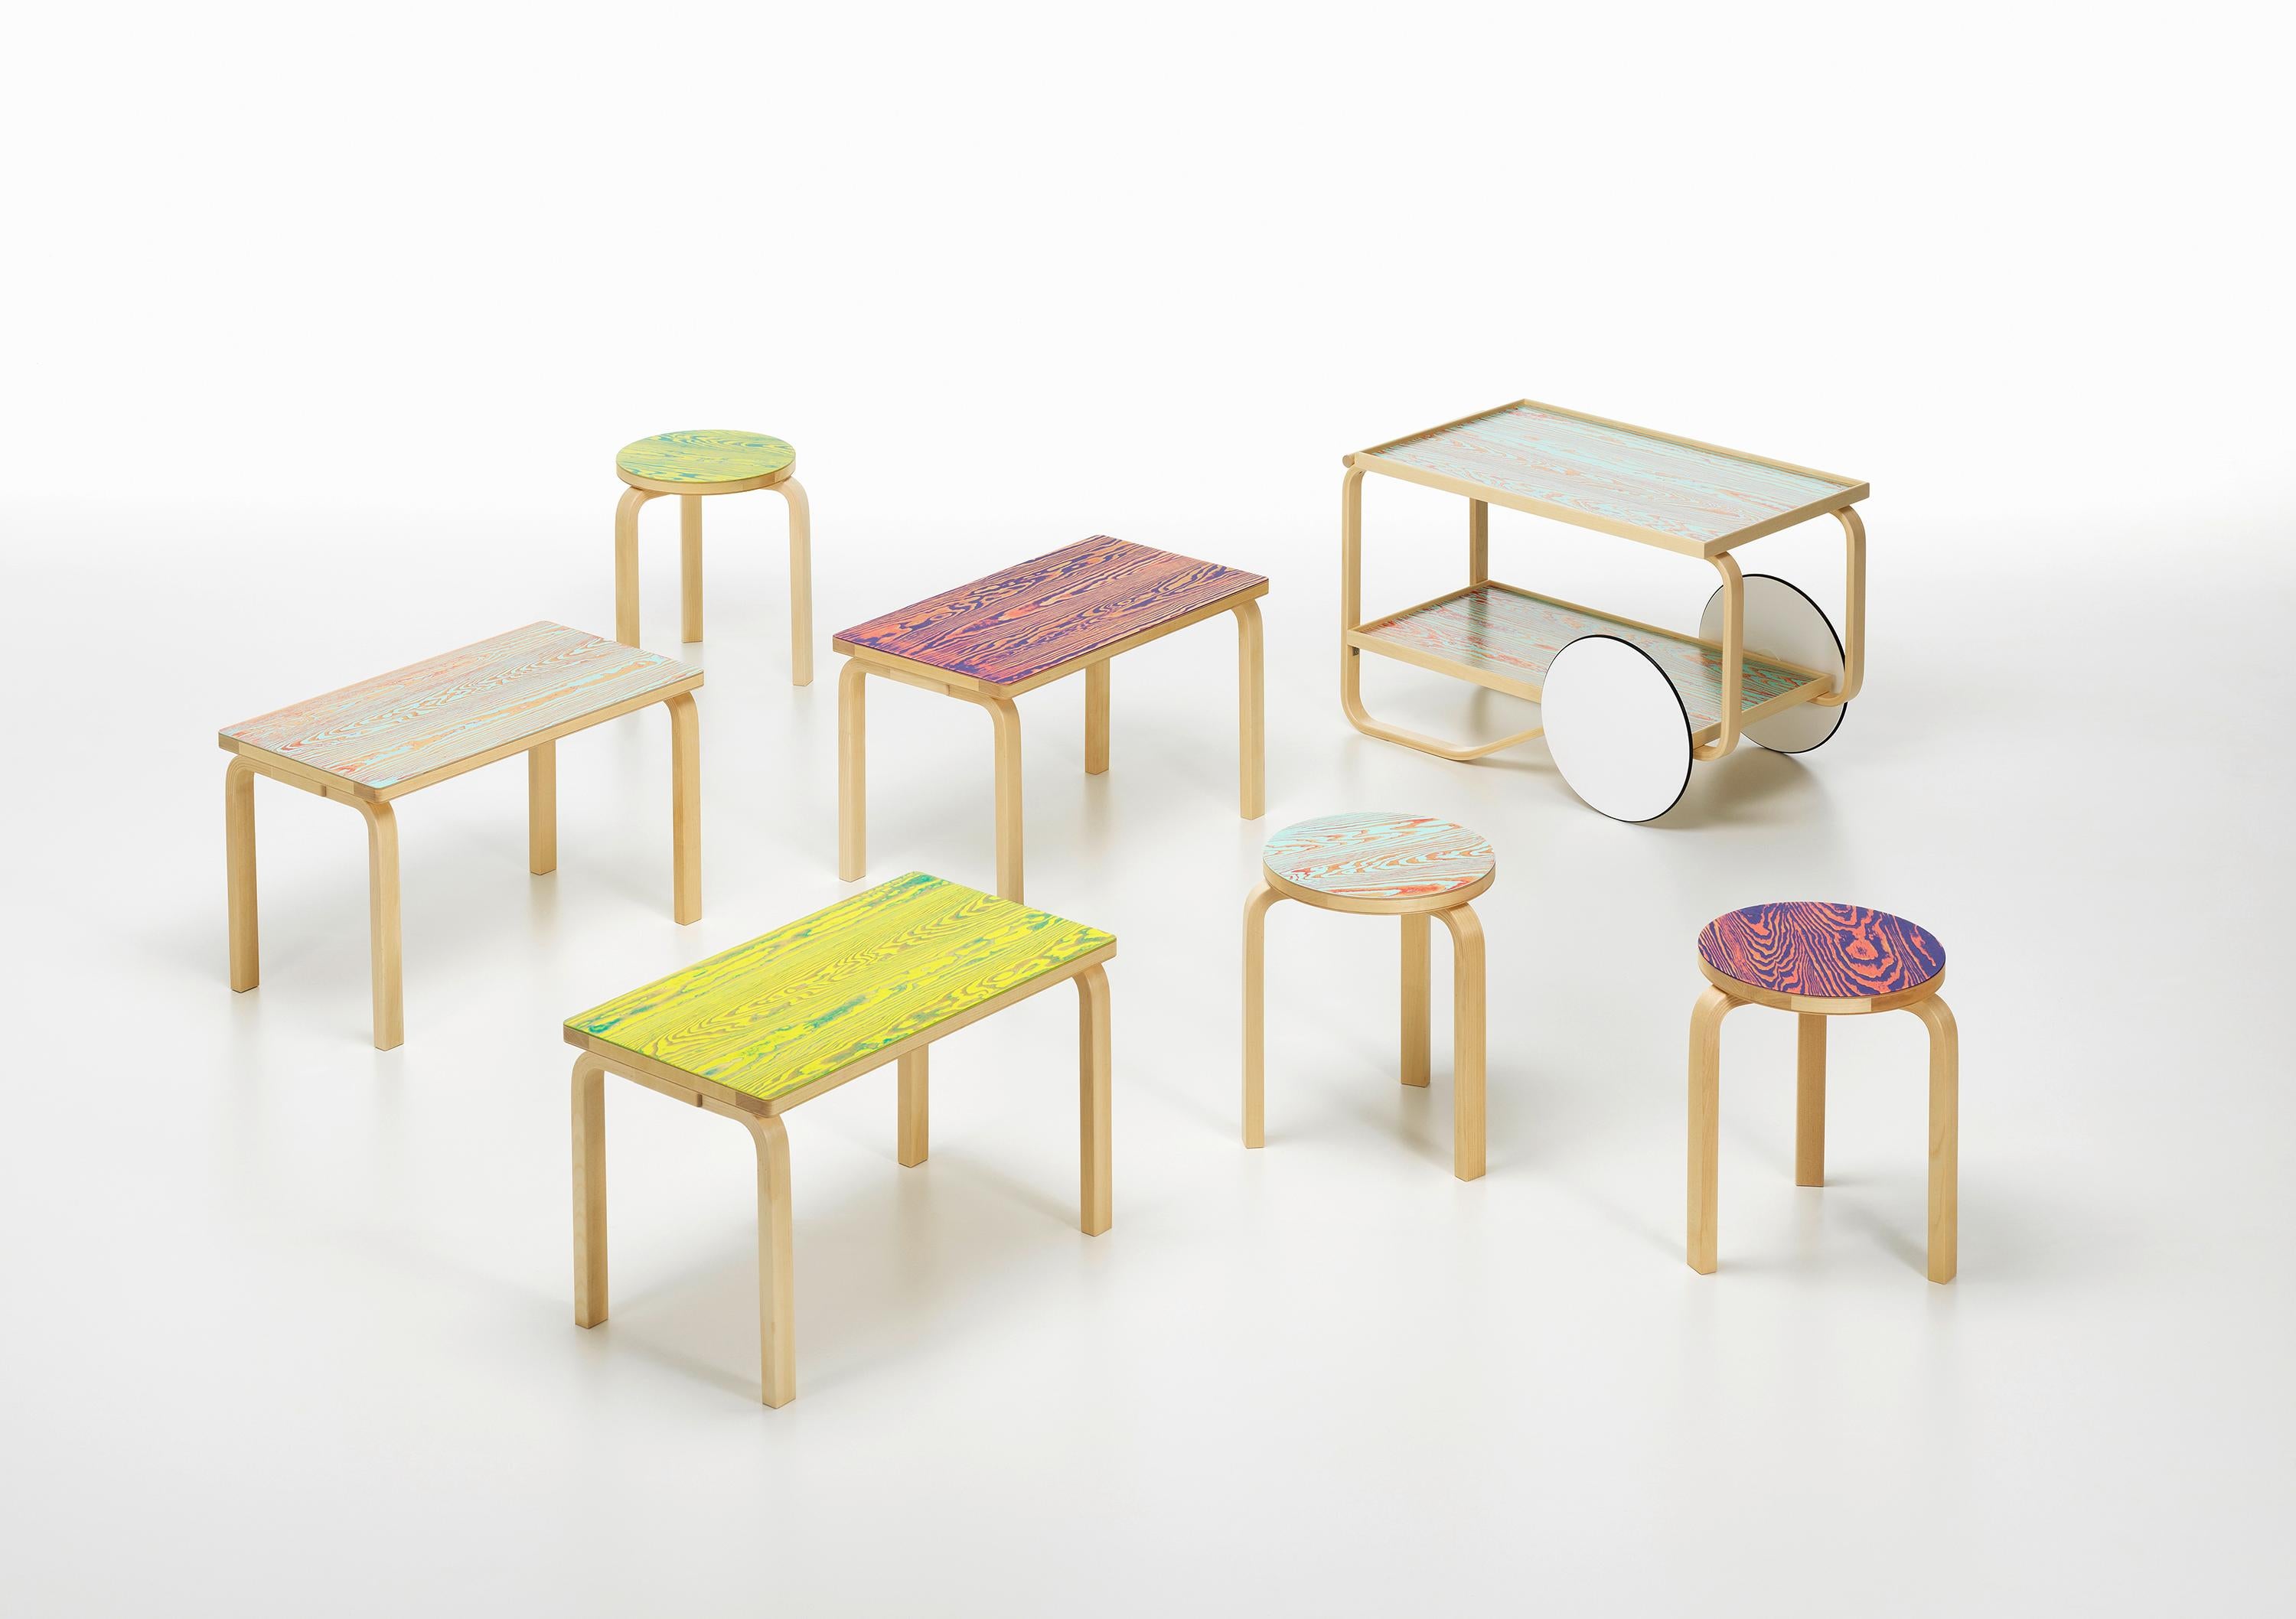 Birch Artek Bench 153B Coloring in Green and Yellow by Alvar Aalto and Jo Nagasaka For Sale